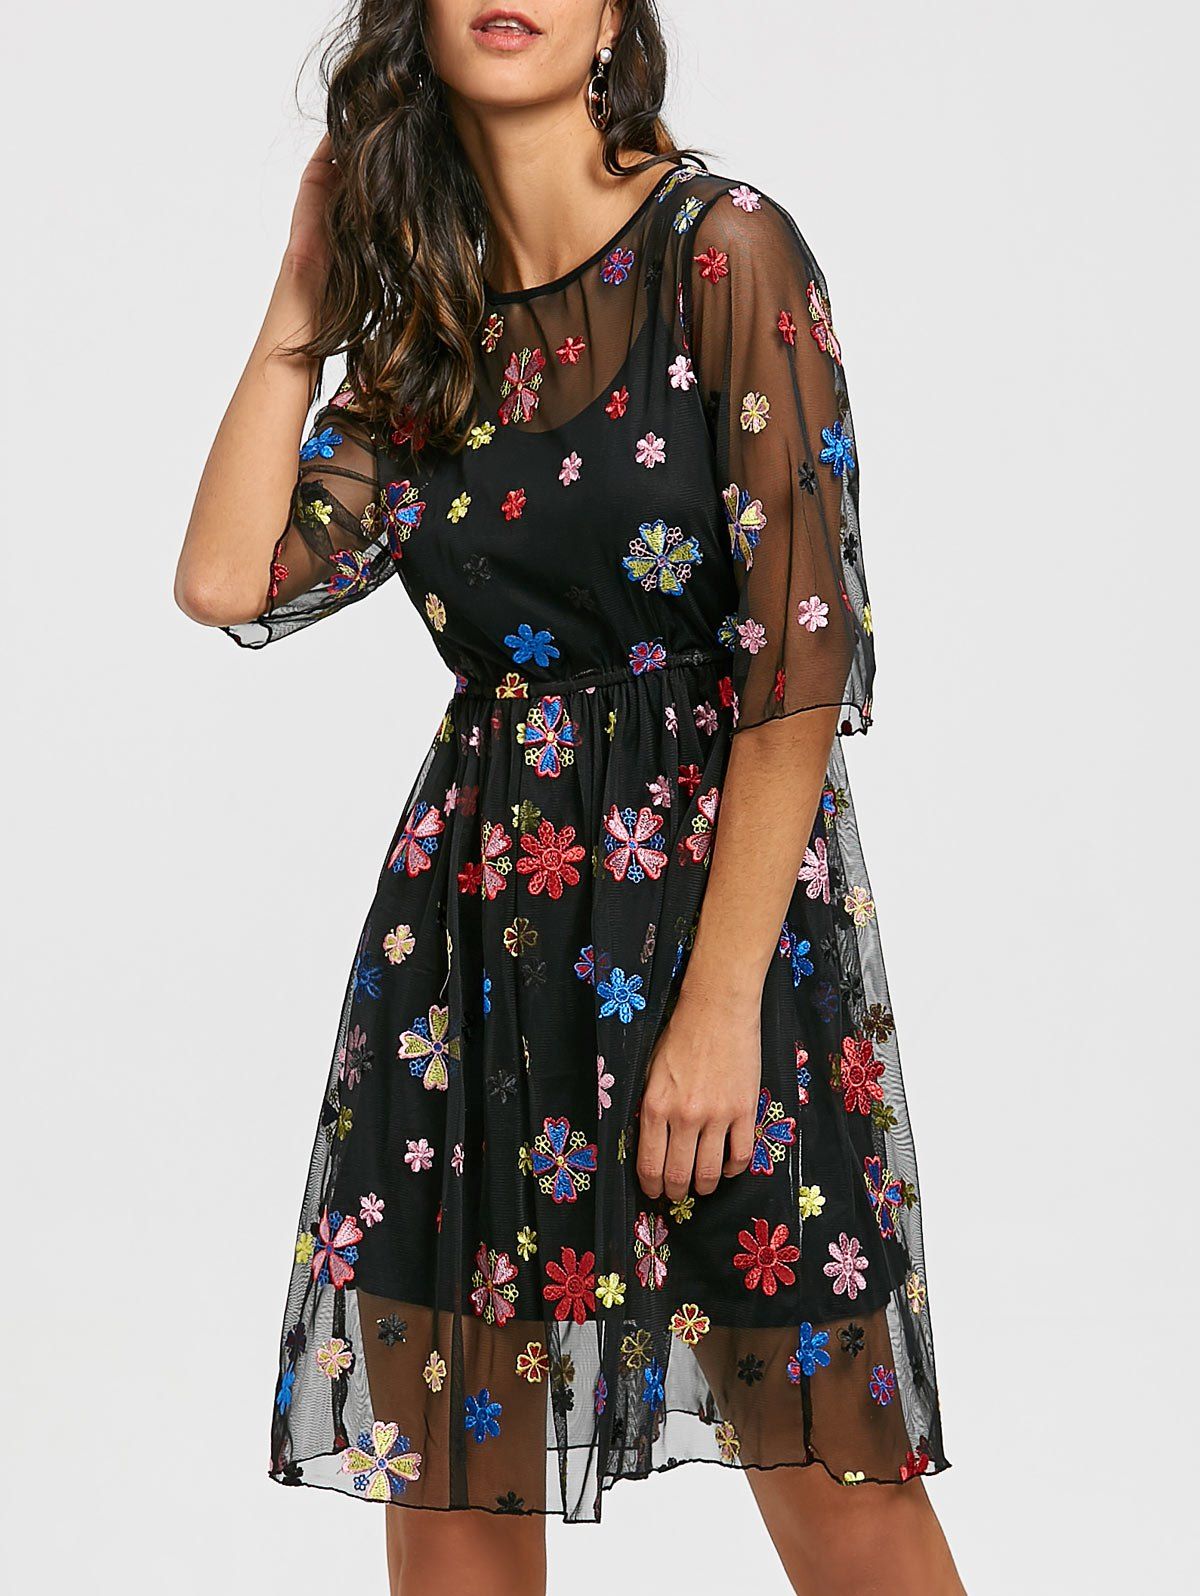 See Thru Embroidery Floral Dress and Cami Dress - BLACK M